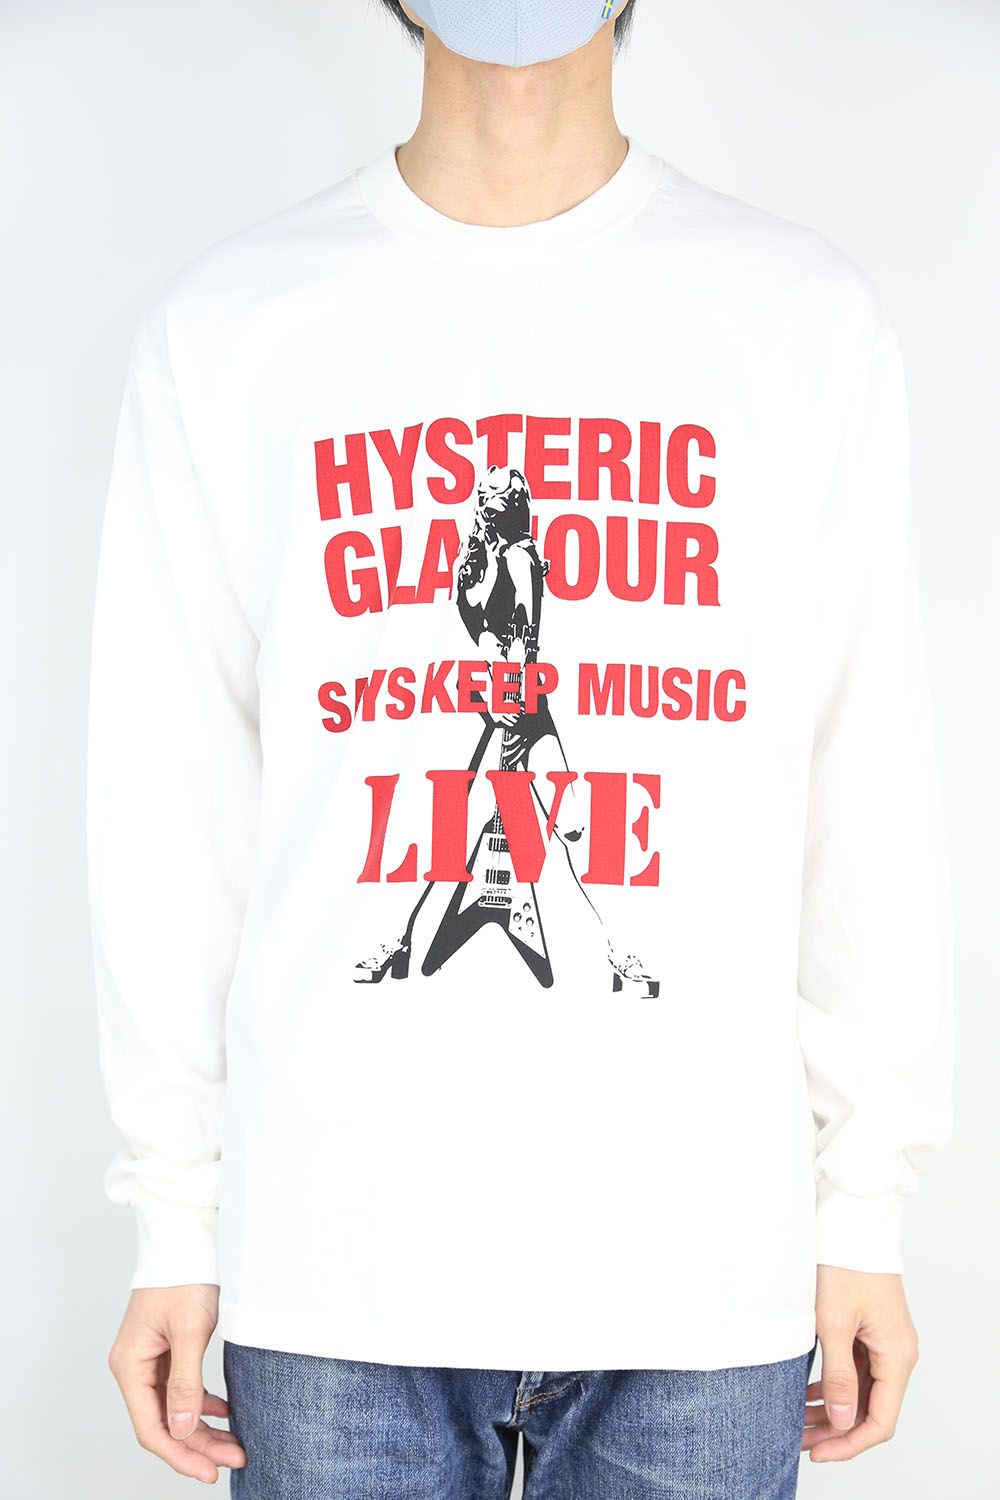 HYSTERIC GLAMOUR - KEEP MUSIC Tシャツ / ホワイト | Tempt